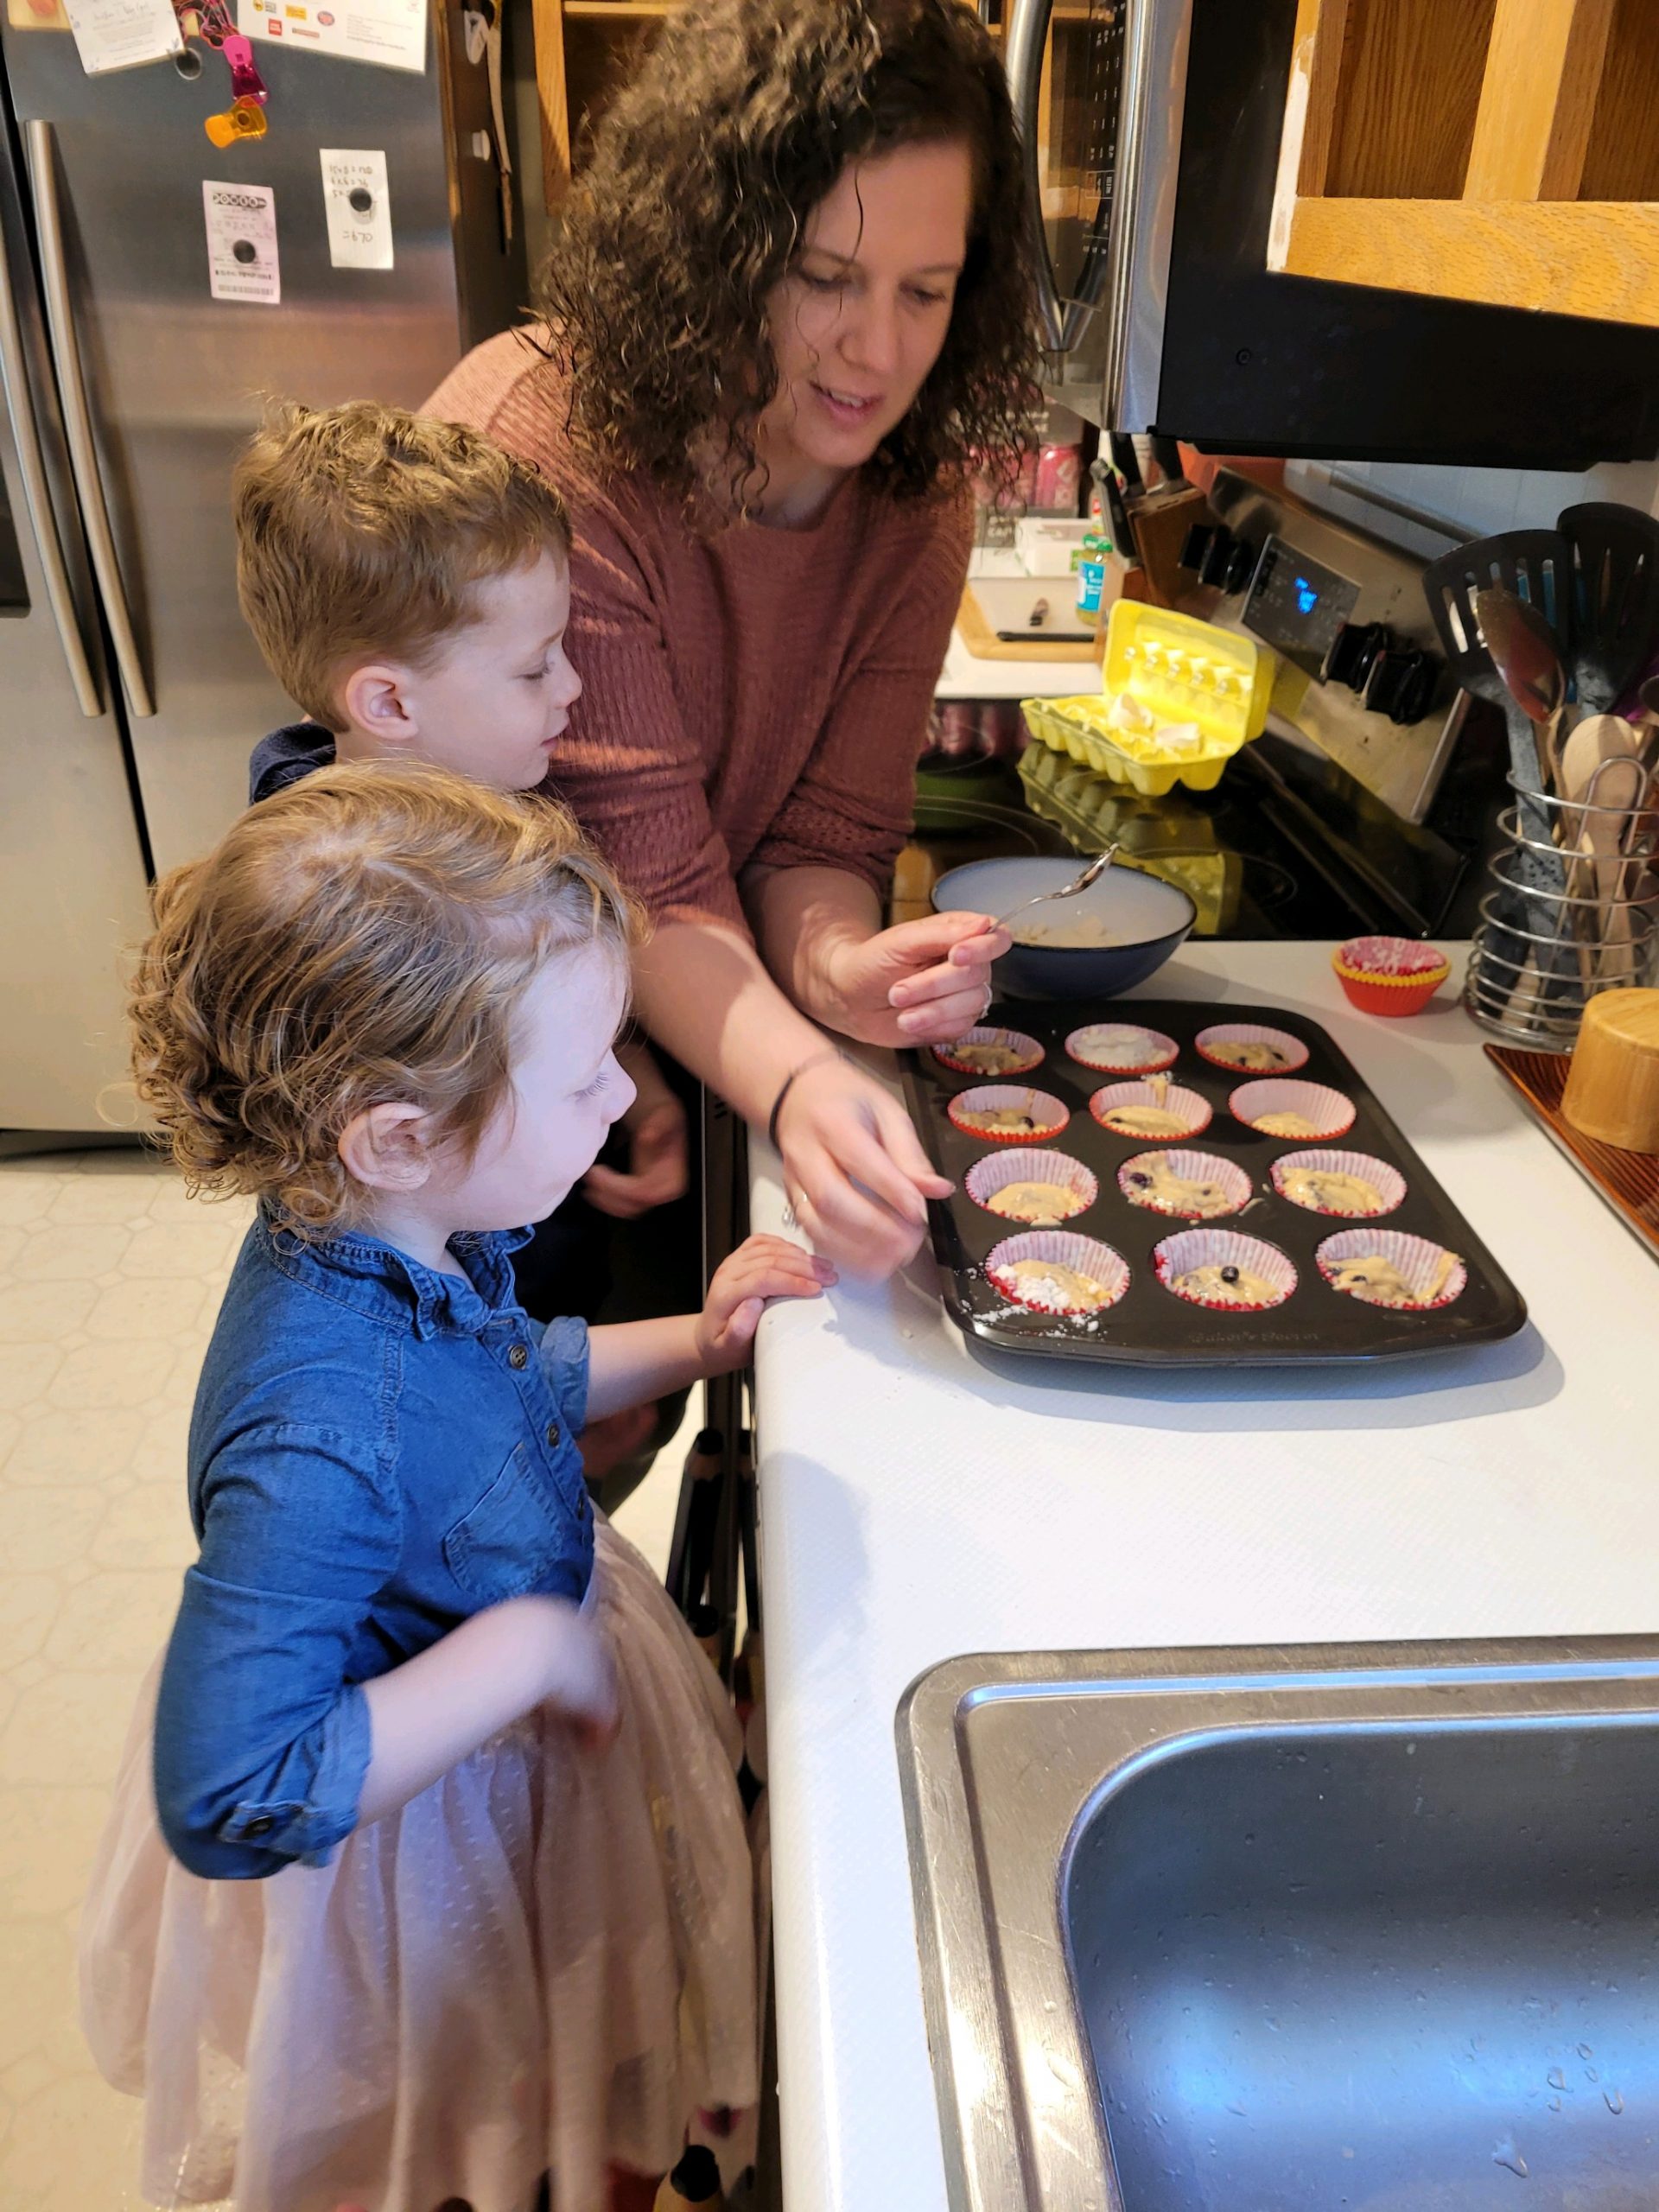 denise baking cookies in muffin tins with her son and daughter